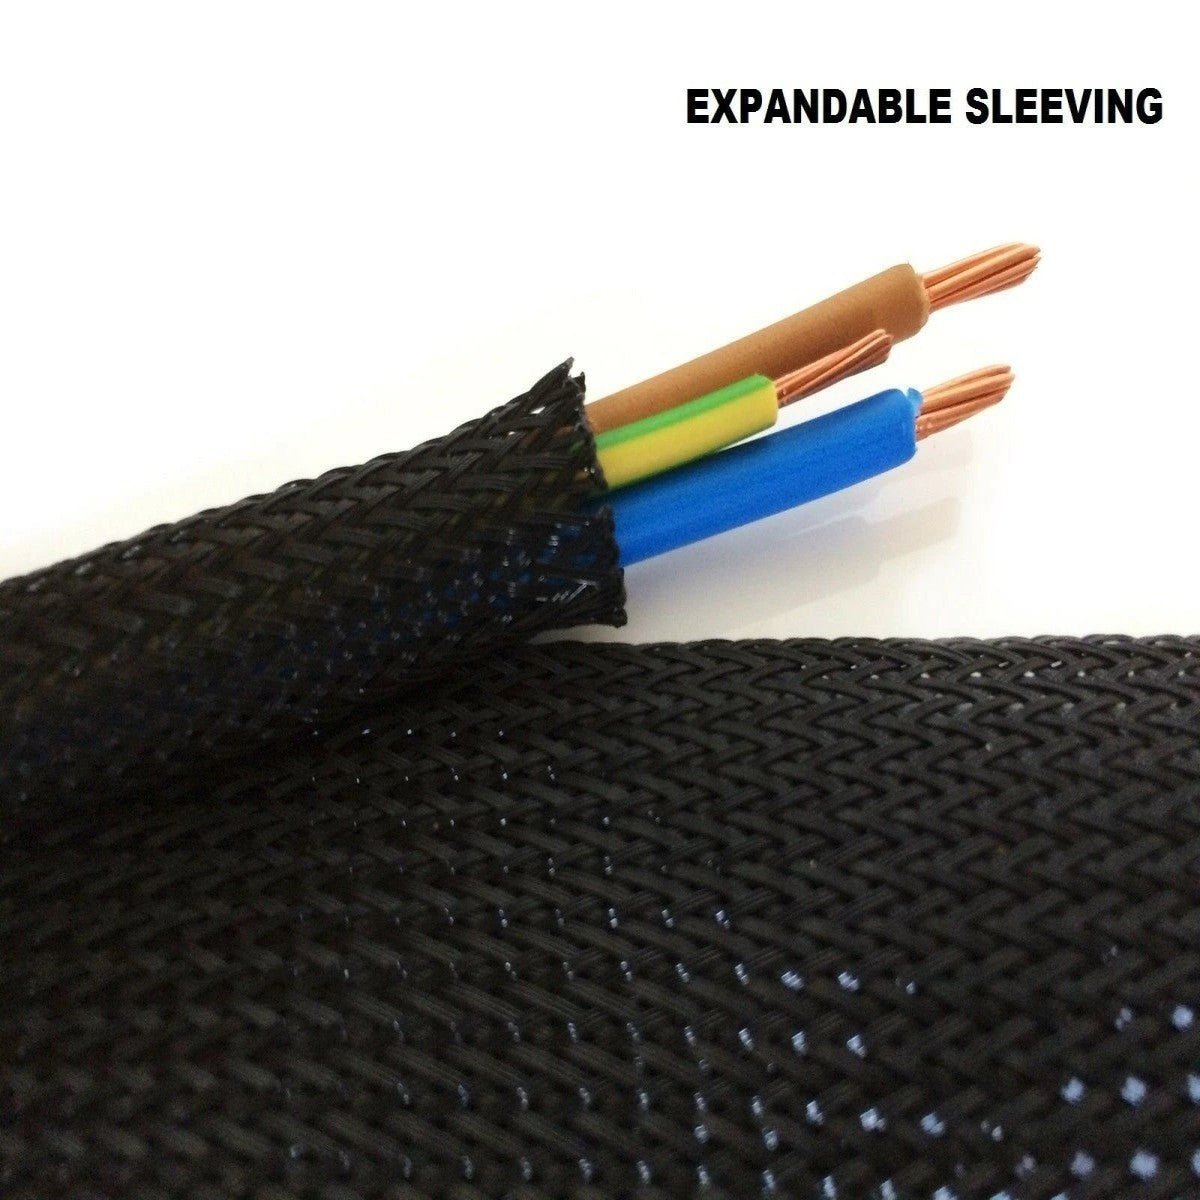 Expandable Braided Nylon Mesh Cable Sleeve (12mm Diameter) - Various Lengths